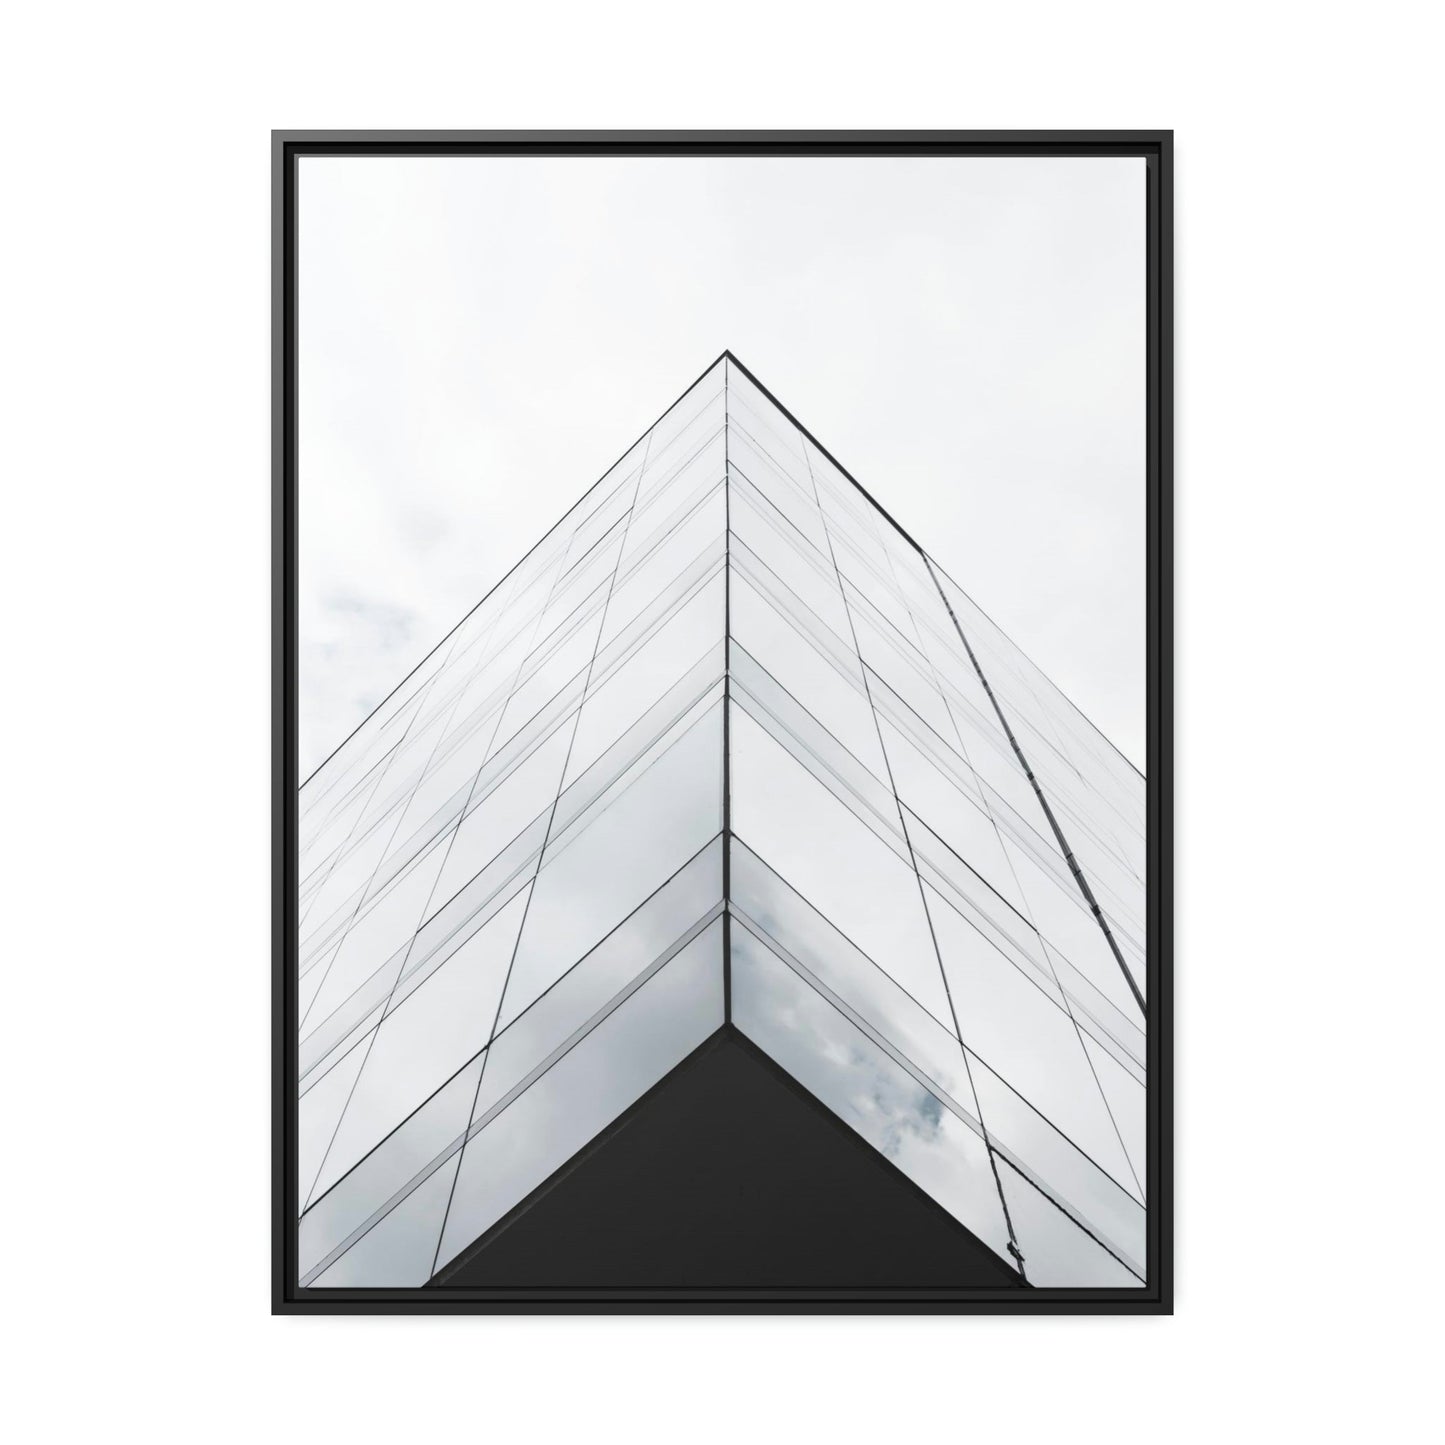 The Grandeur of Cities: Framed Canvas & Poster Print of Iconic Buildings and Landmarks